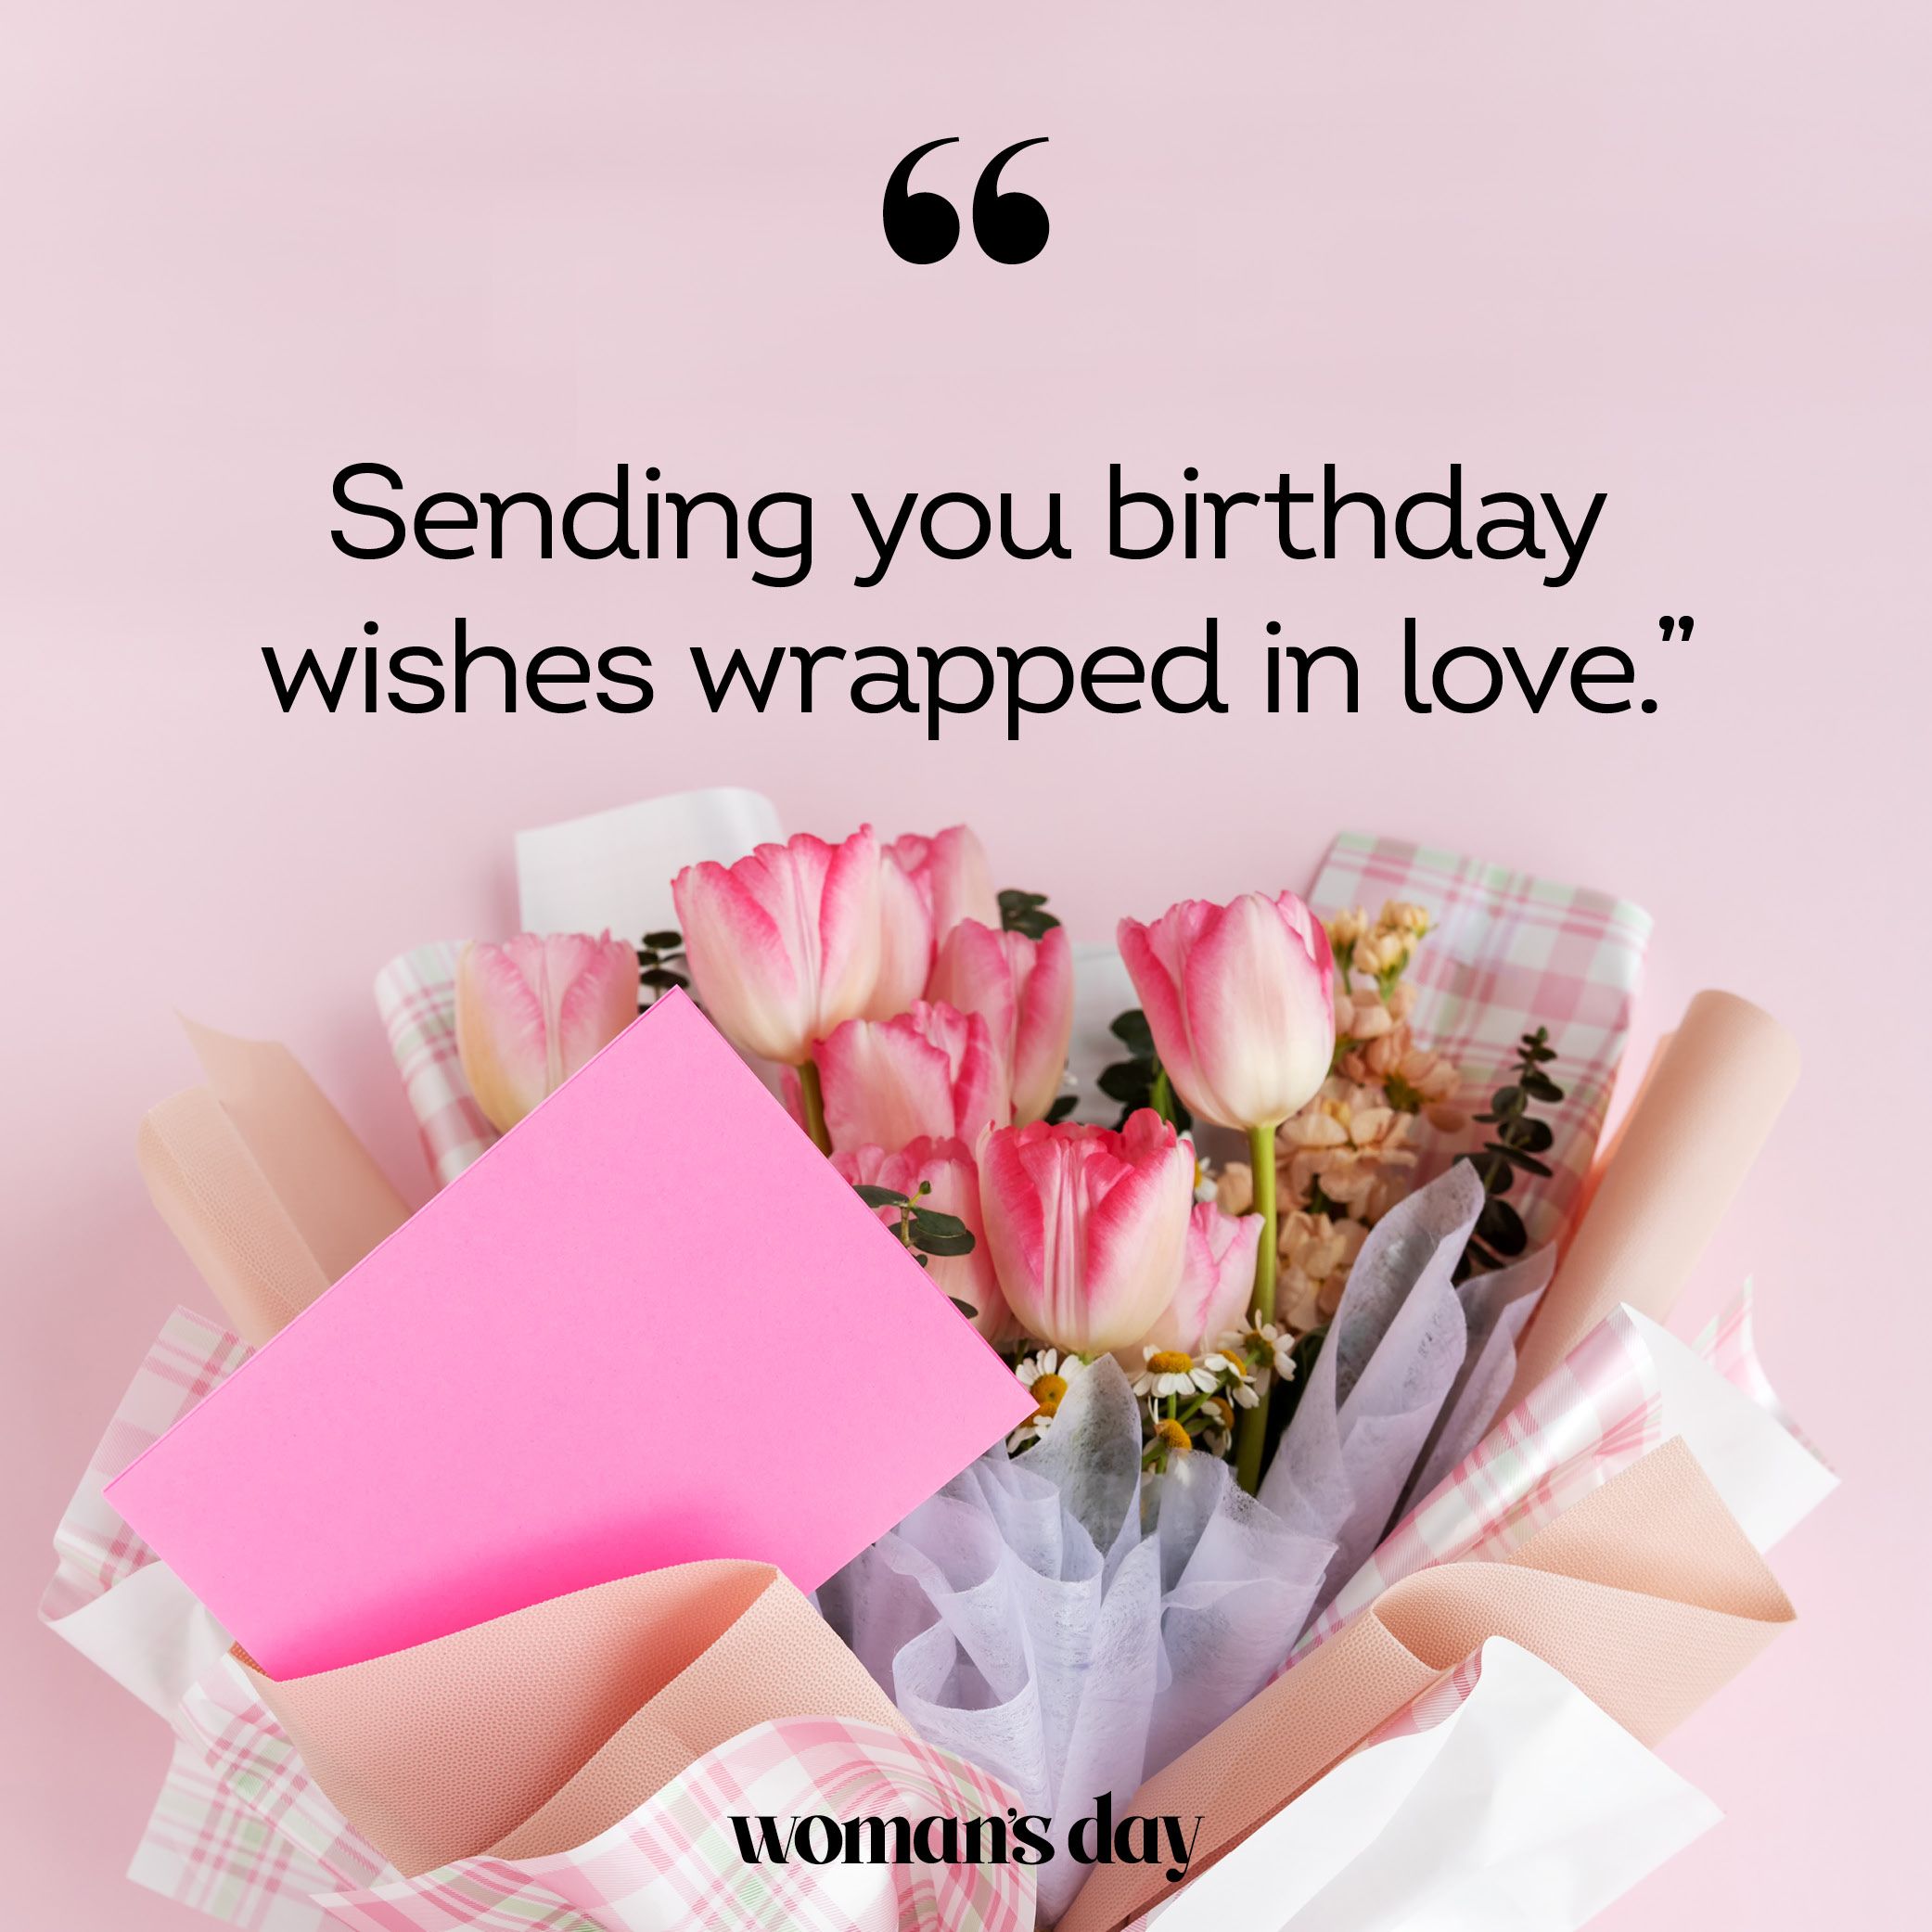 happy birthday wishes for a woman